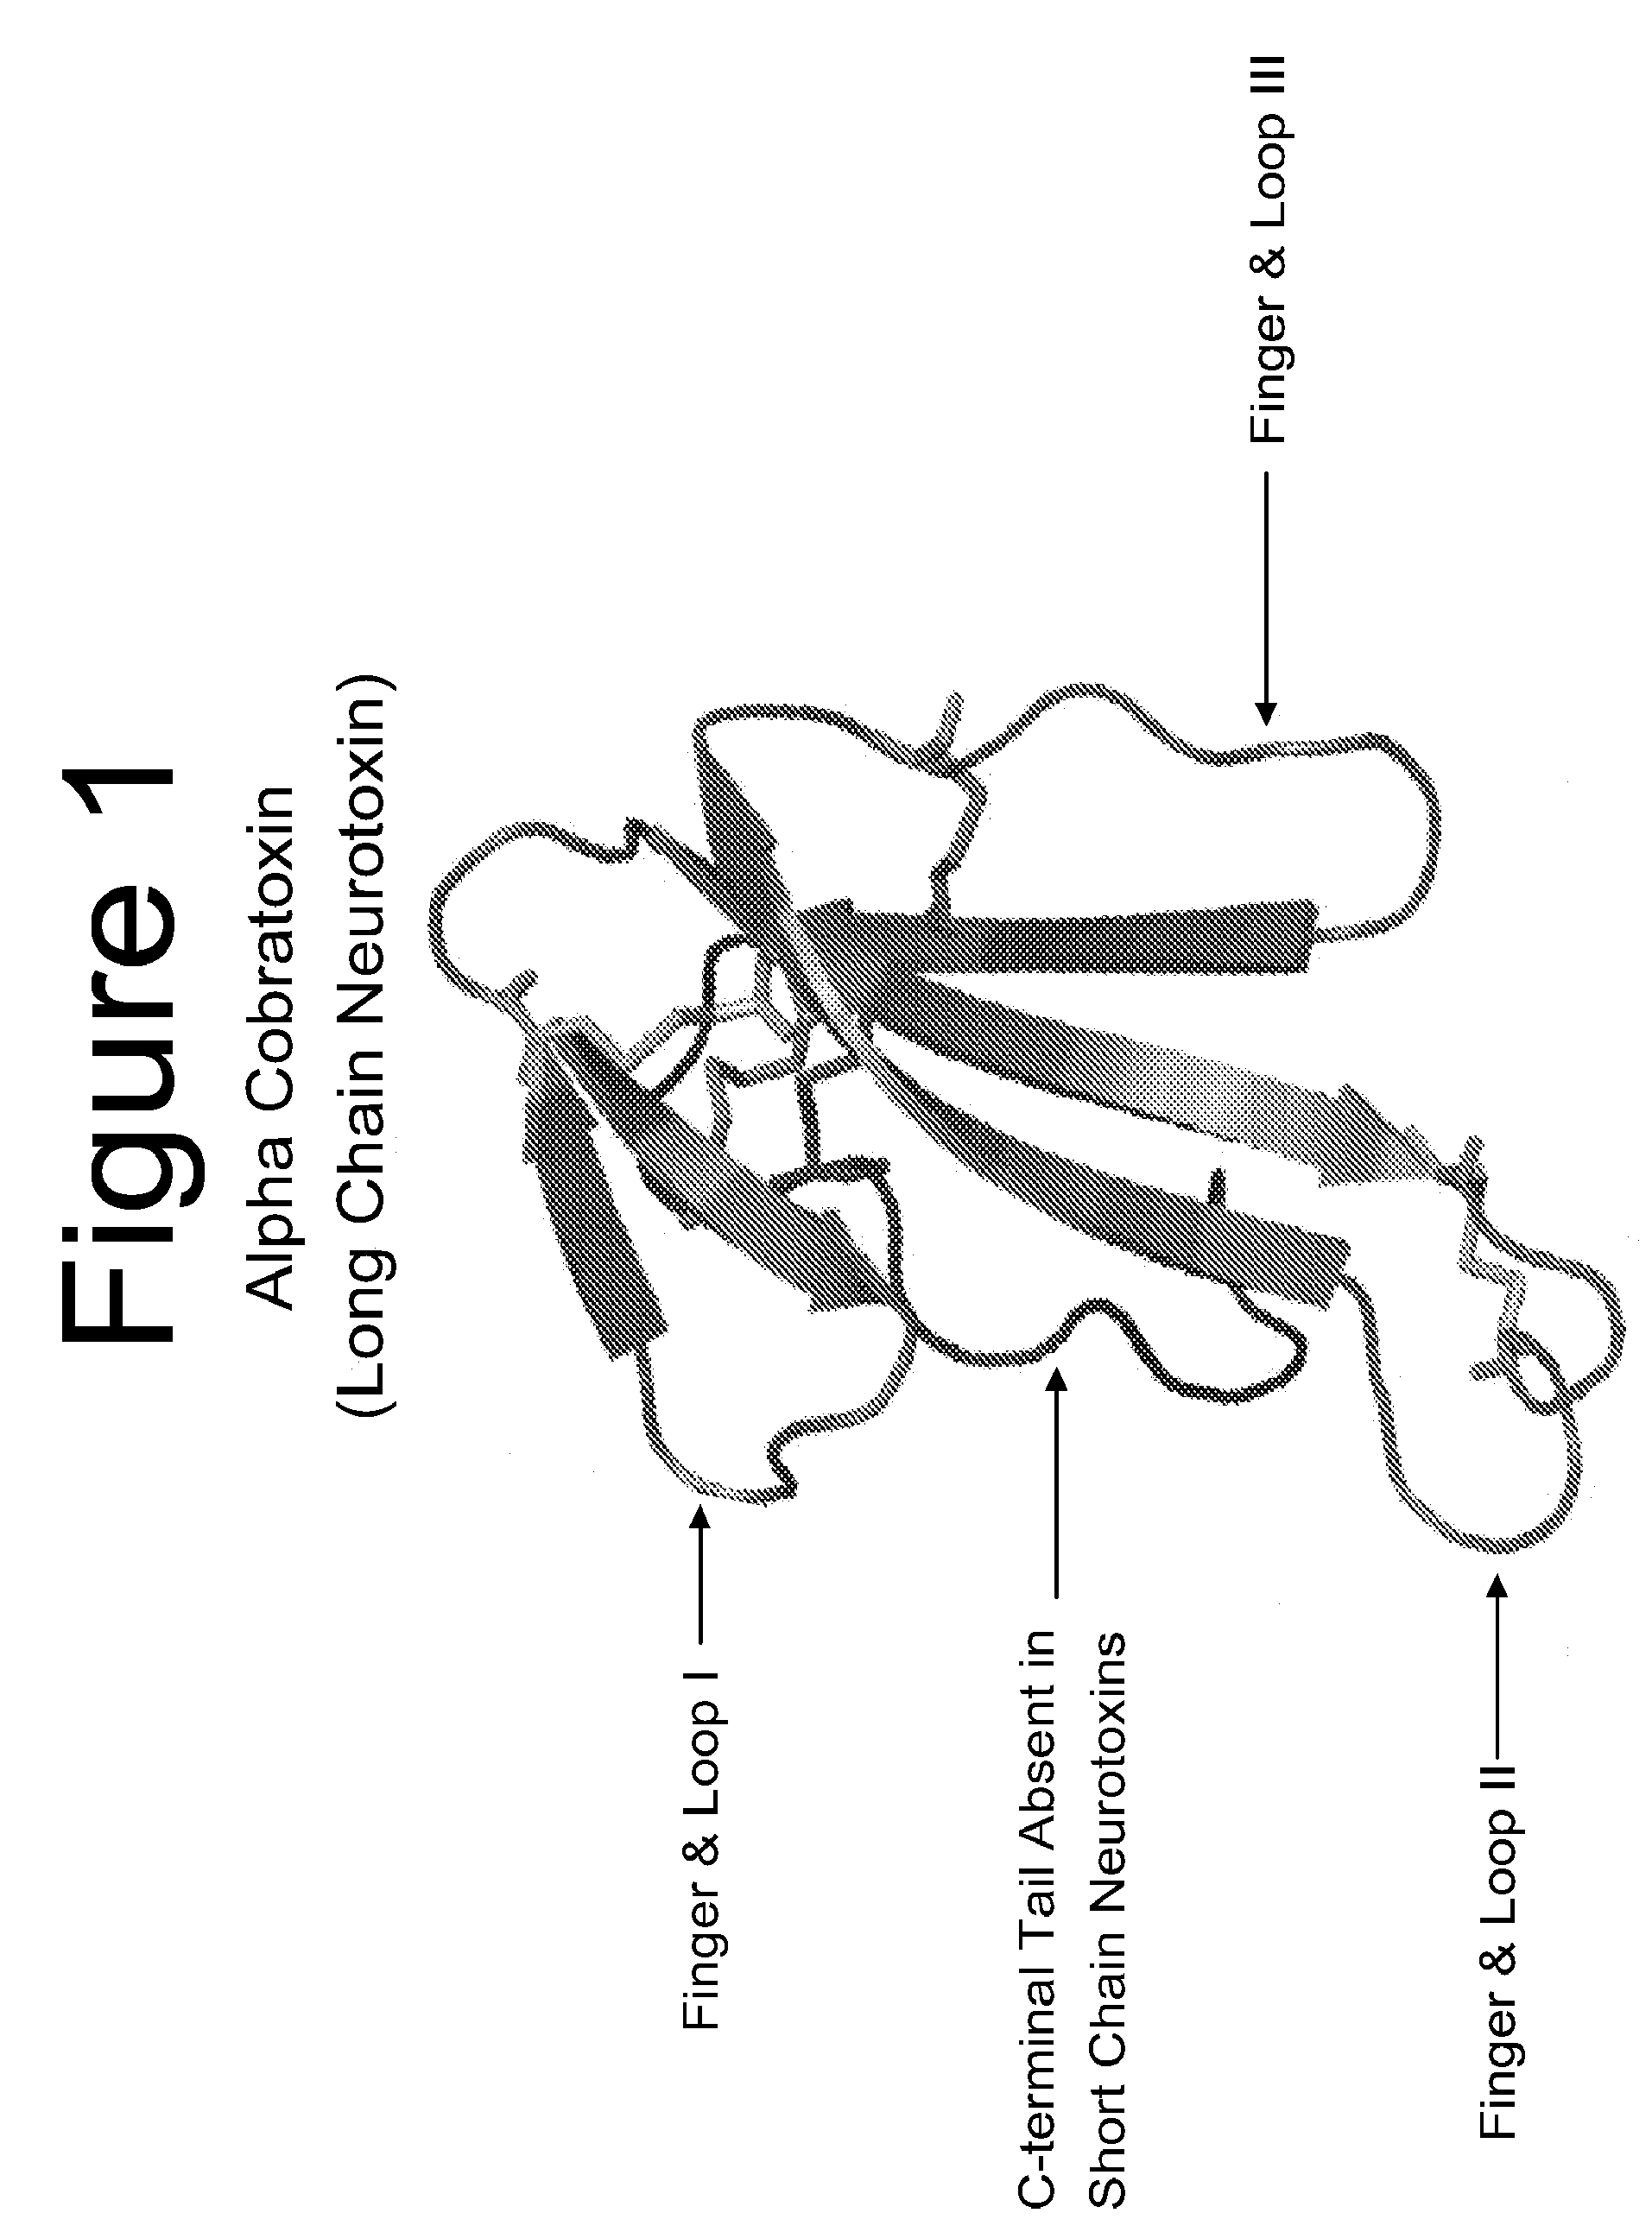 Postsynaptically Targeted Chemodenervation Agents and Their Methods of Use